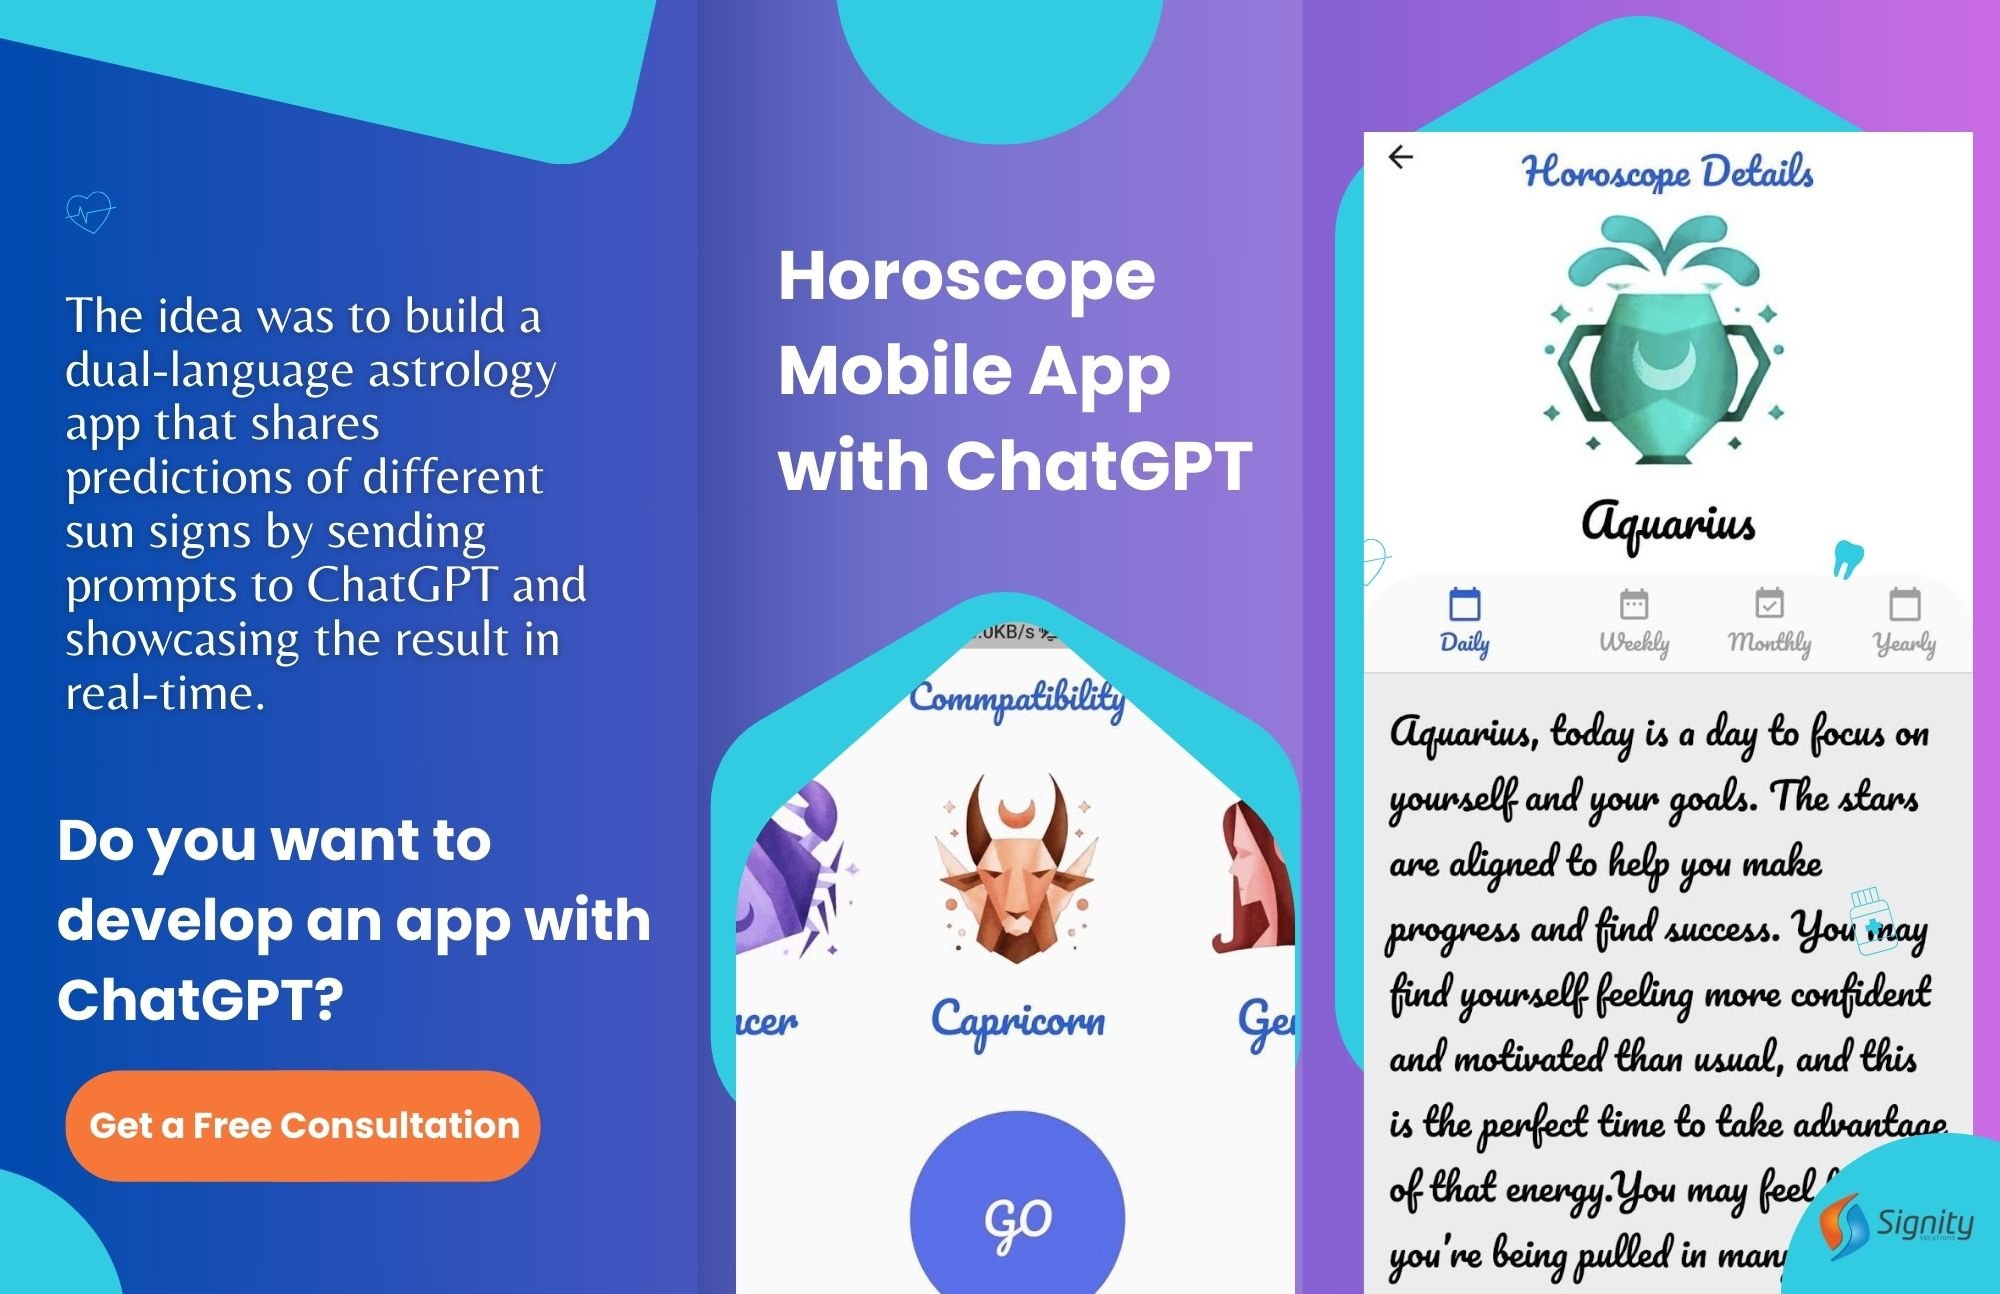 Horoscope Mobile App with ChatGPT